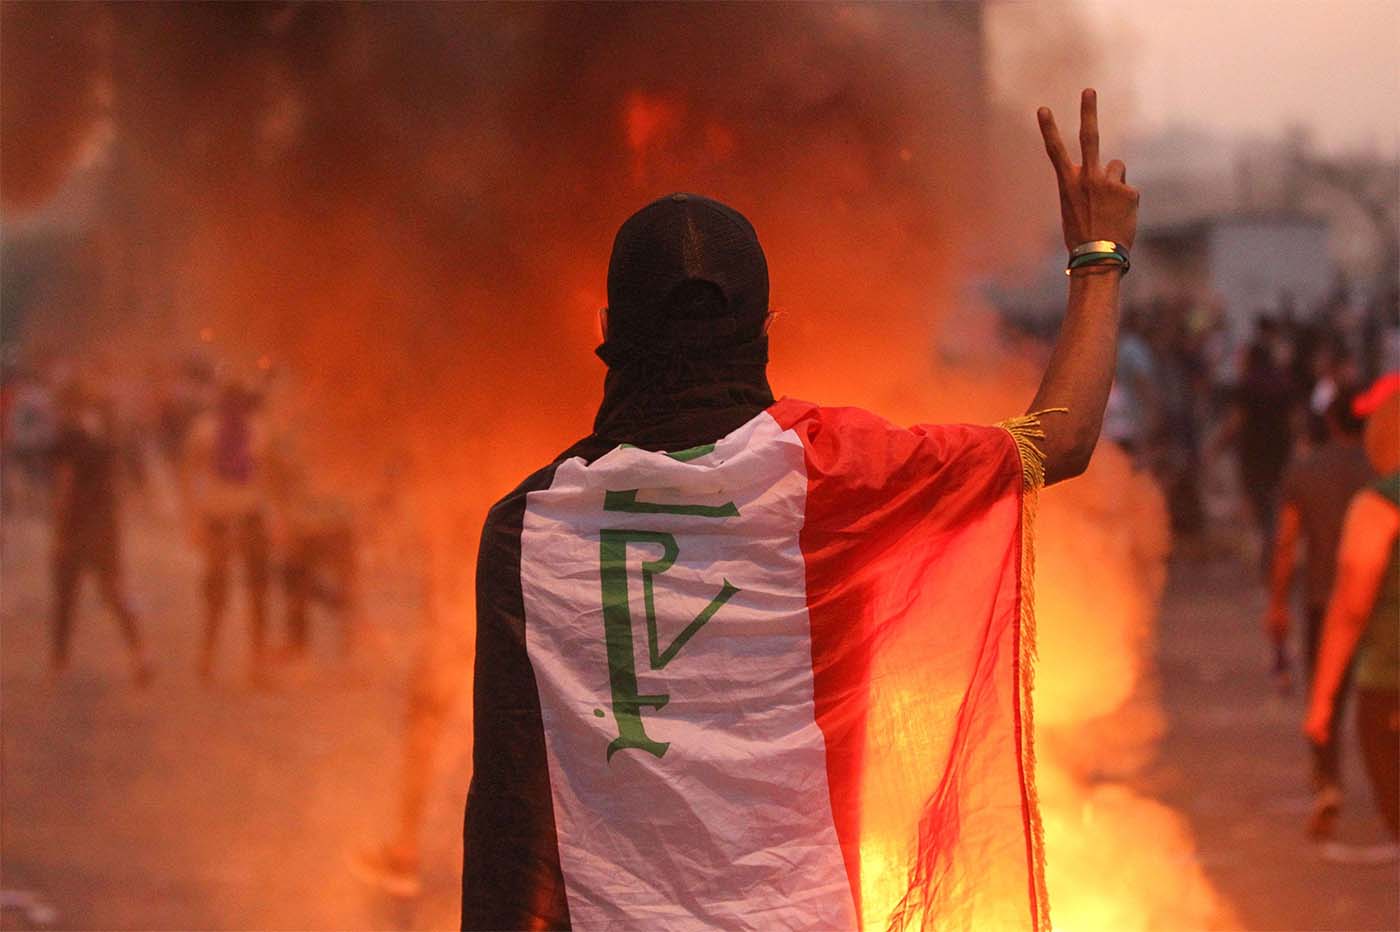 An Iraqi protester gestures the v-sign during a demonstration against state corruption, failing public services and unemployment at Tayaran square in Baghdad